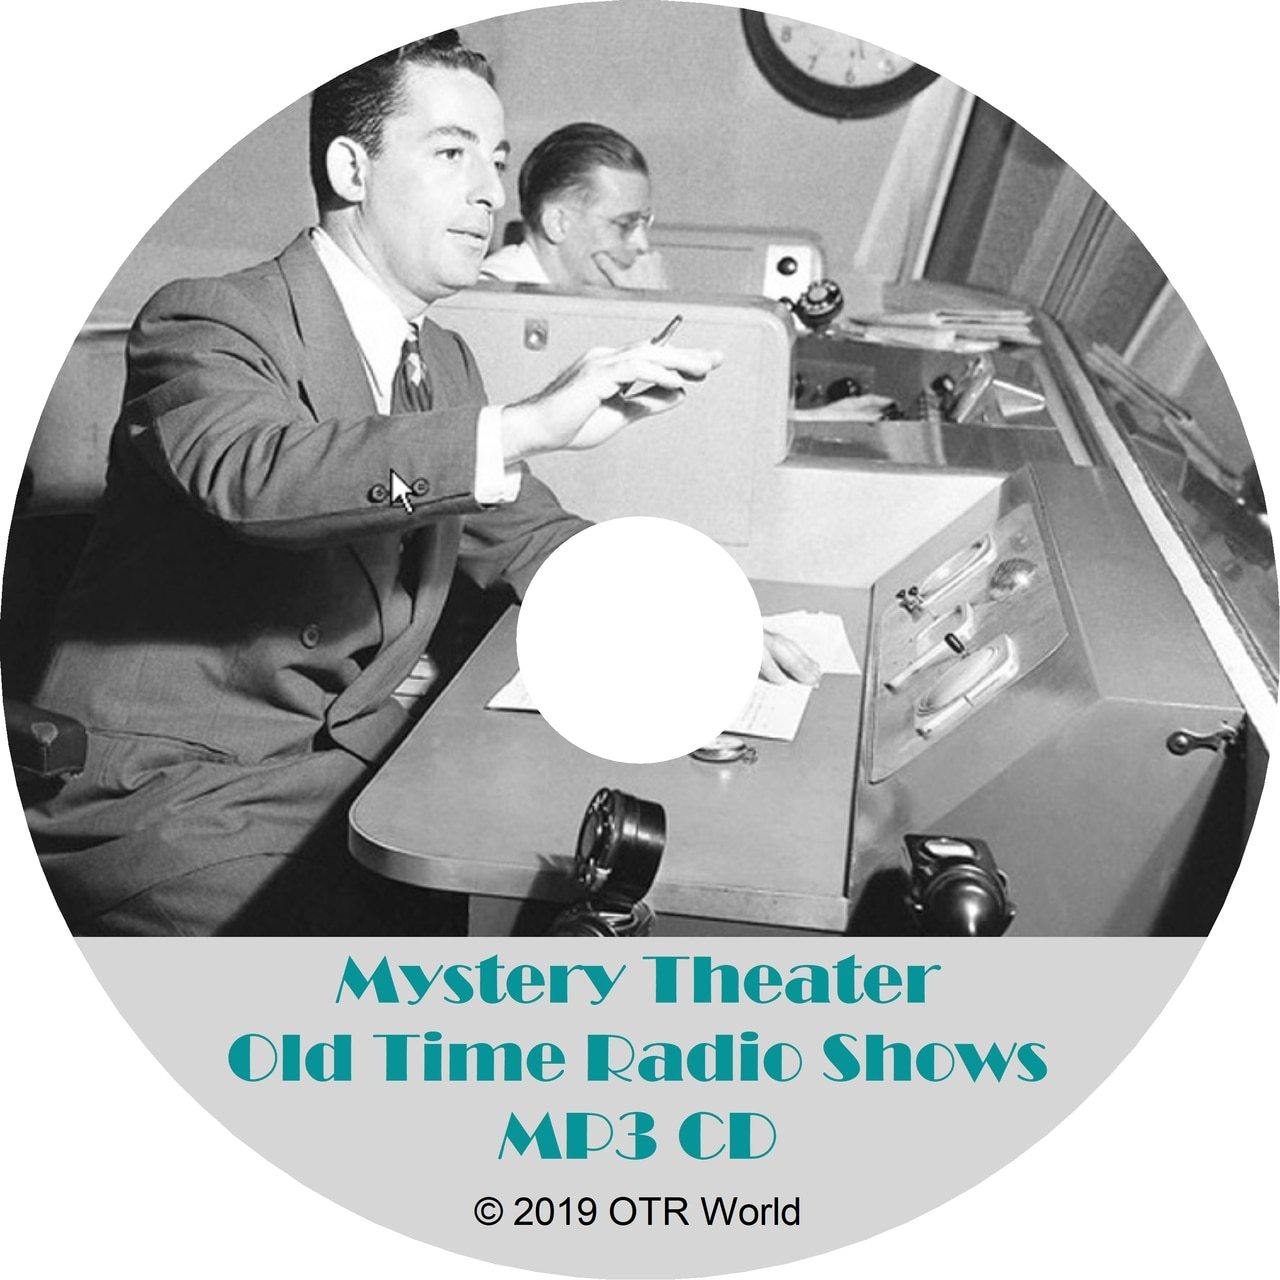 Mystery Theater Old Time Radio Shows 10 Episodes On MP3 CD OTR OTRS - OTR World